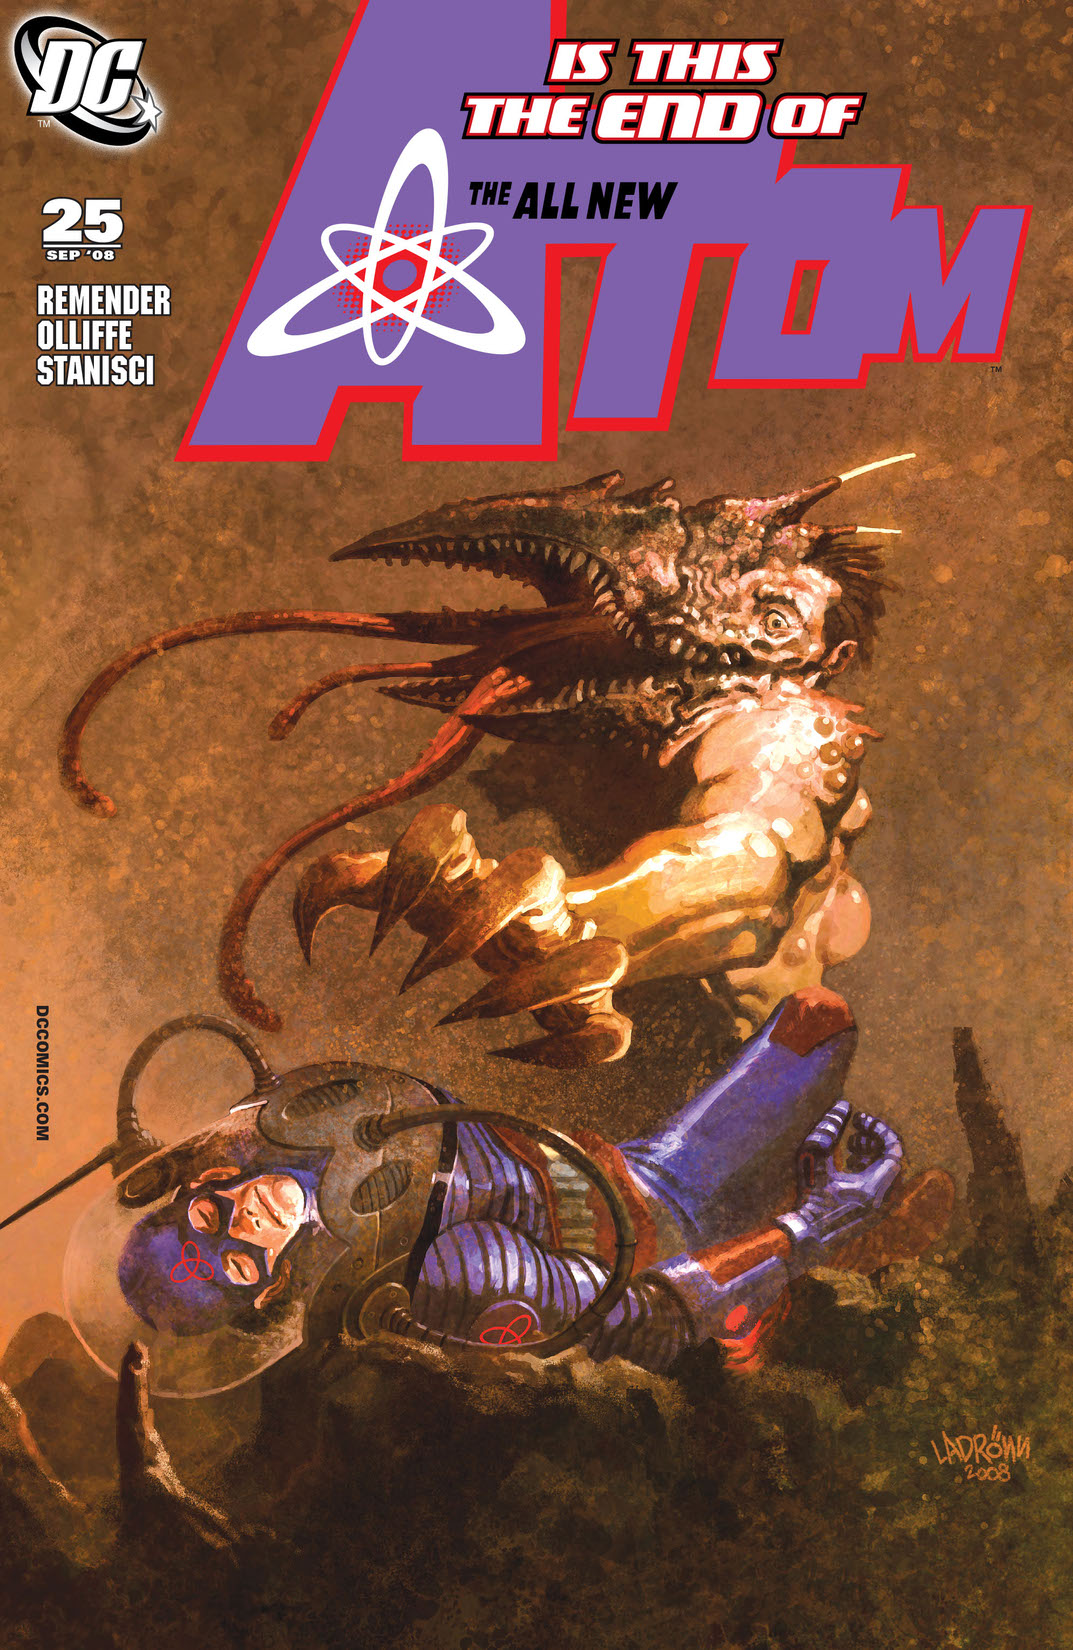 The All New Atom #25 preview images